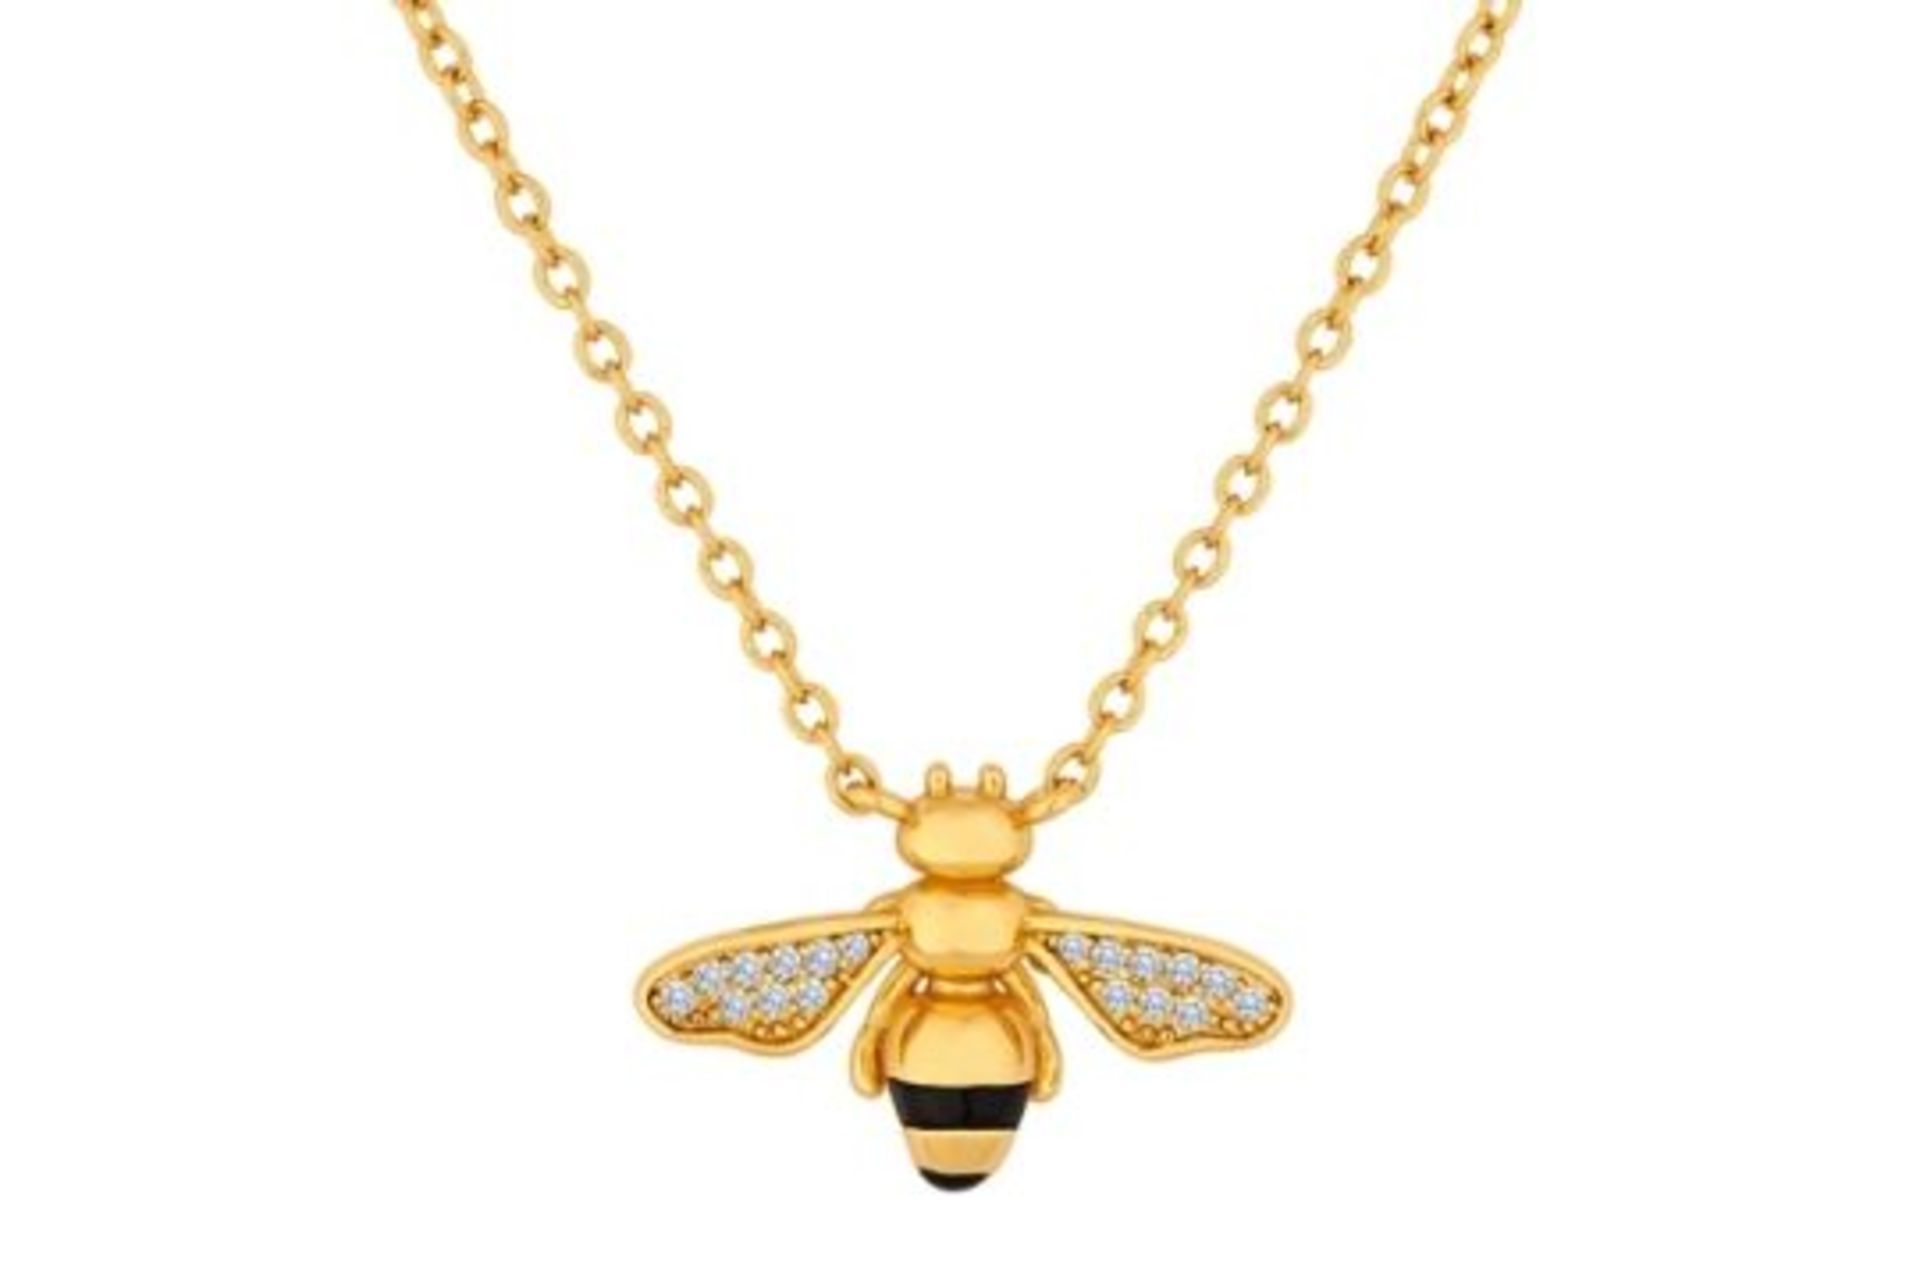 15 X BRAND NEW DIAMONDSTYLE LONDON BEE PENDANT IN GOLD PLATING WITH CRYSTALS RRP £21 EACH